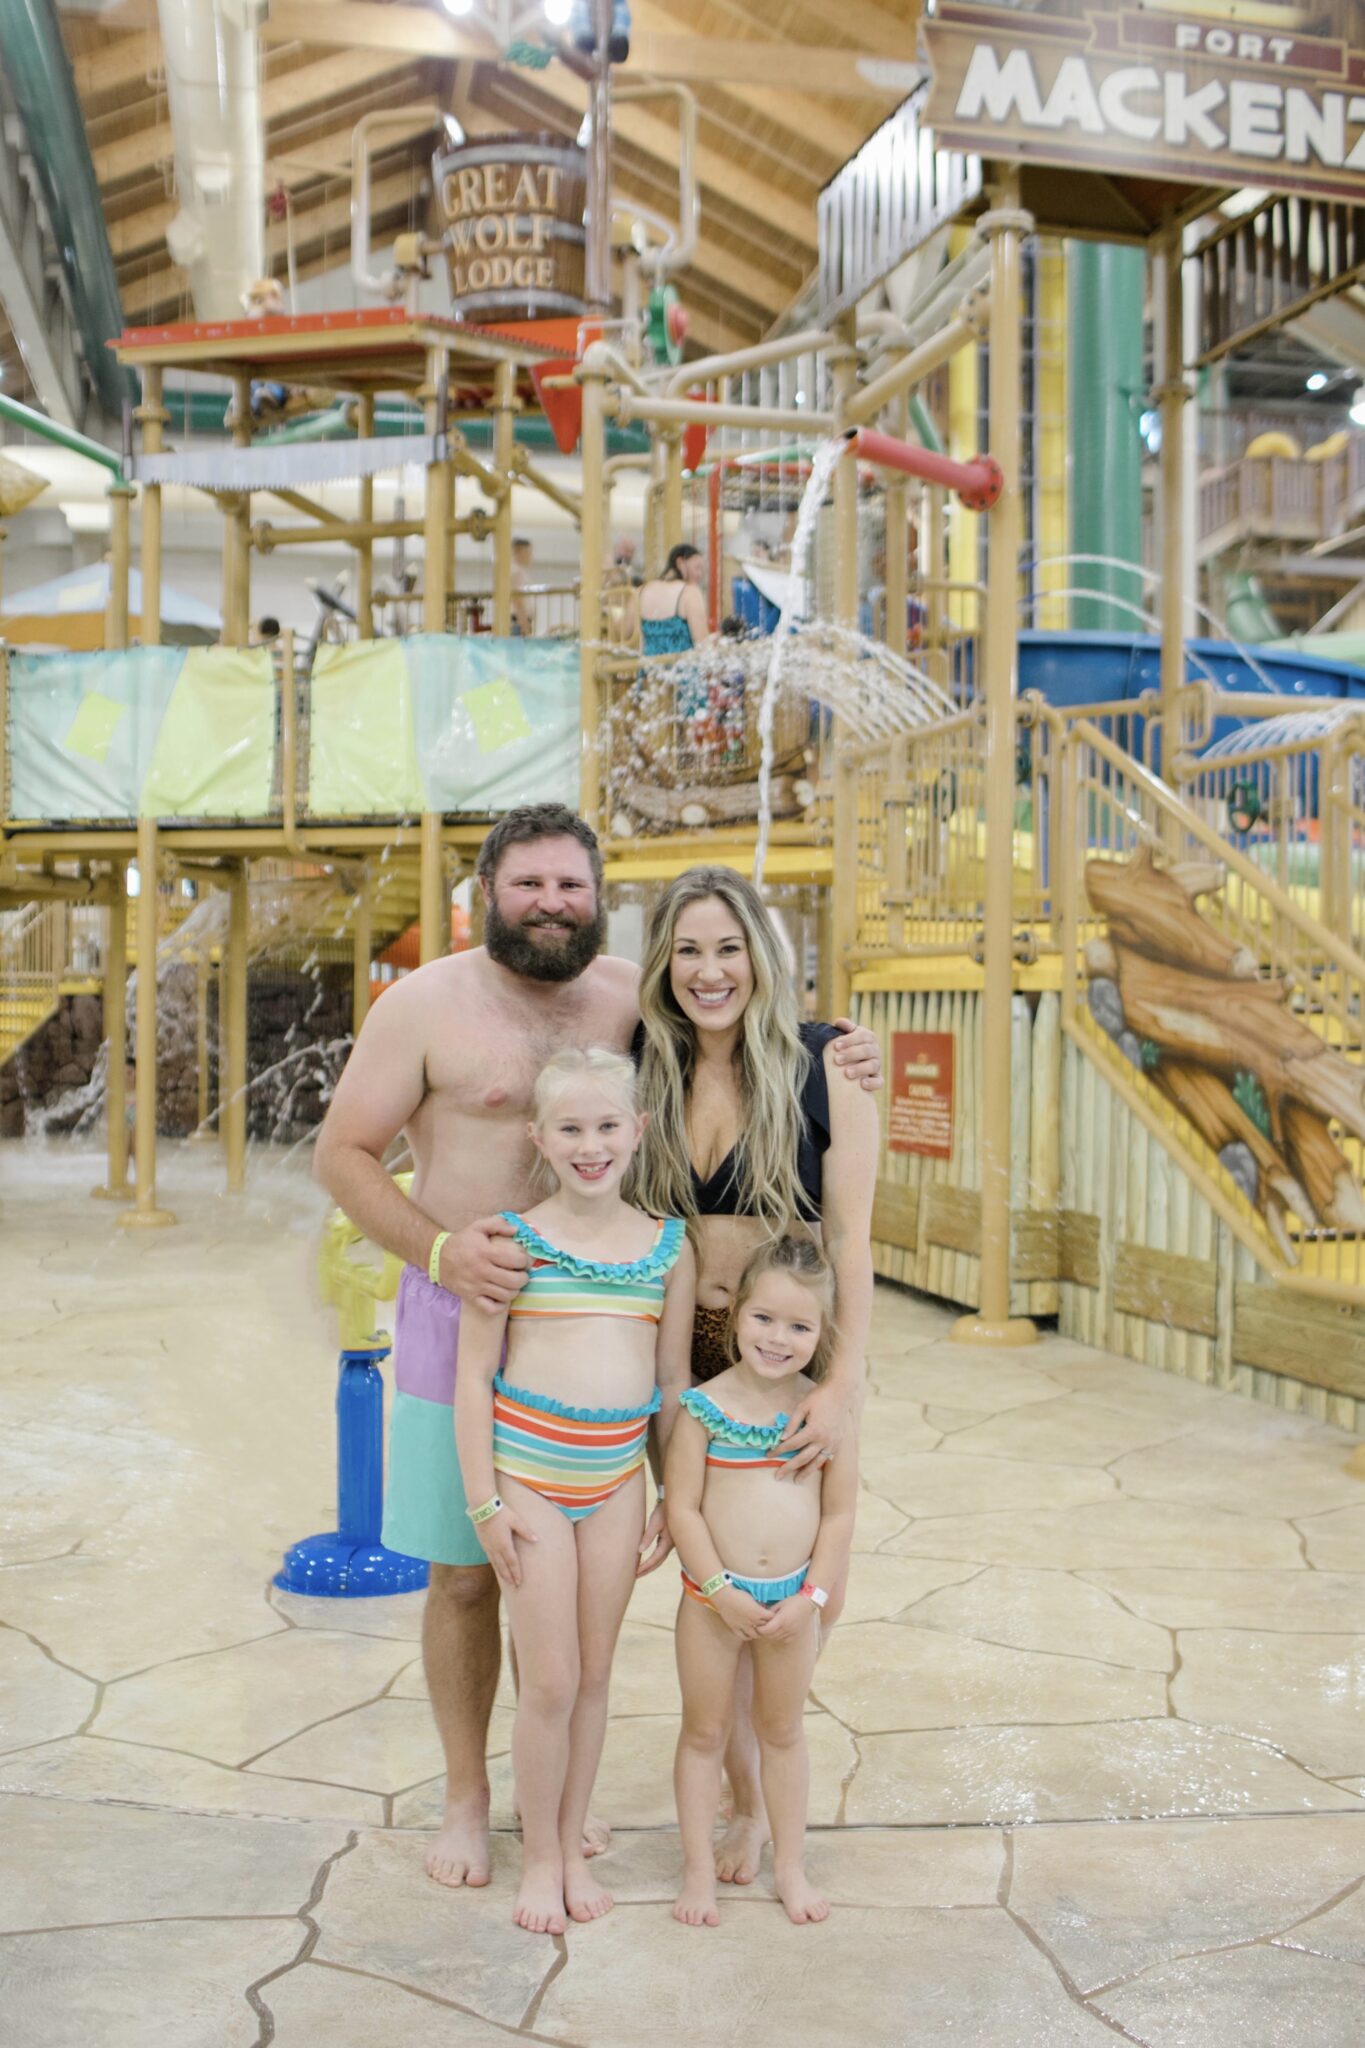 things to do in colorado springs, great wolf lodge in colorado springs, places to go with kids